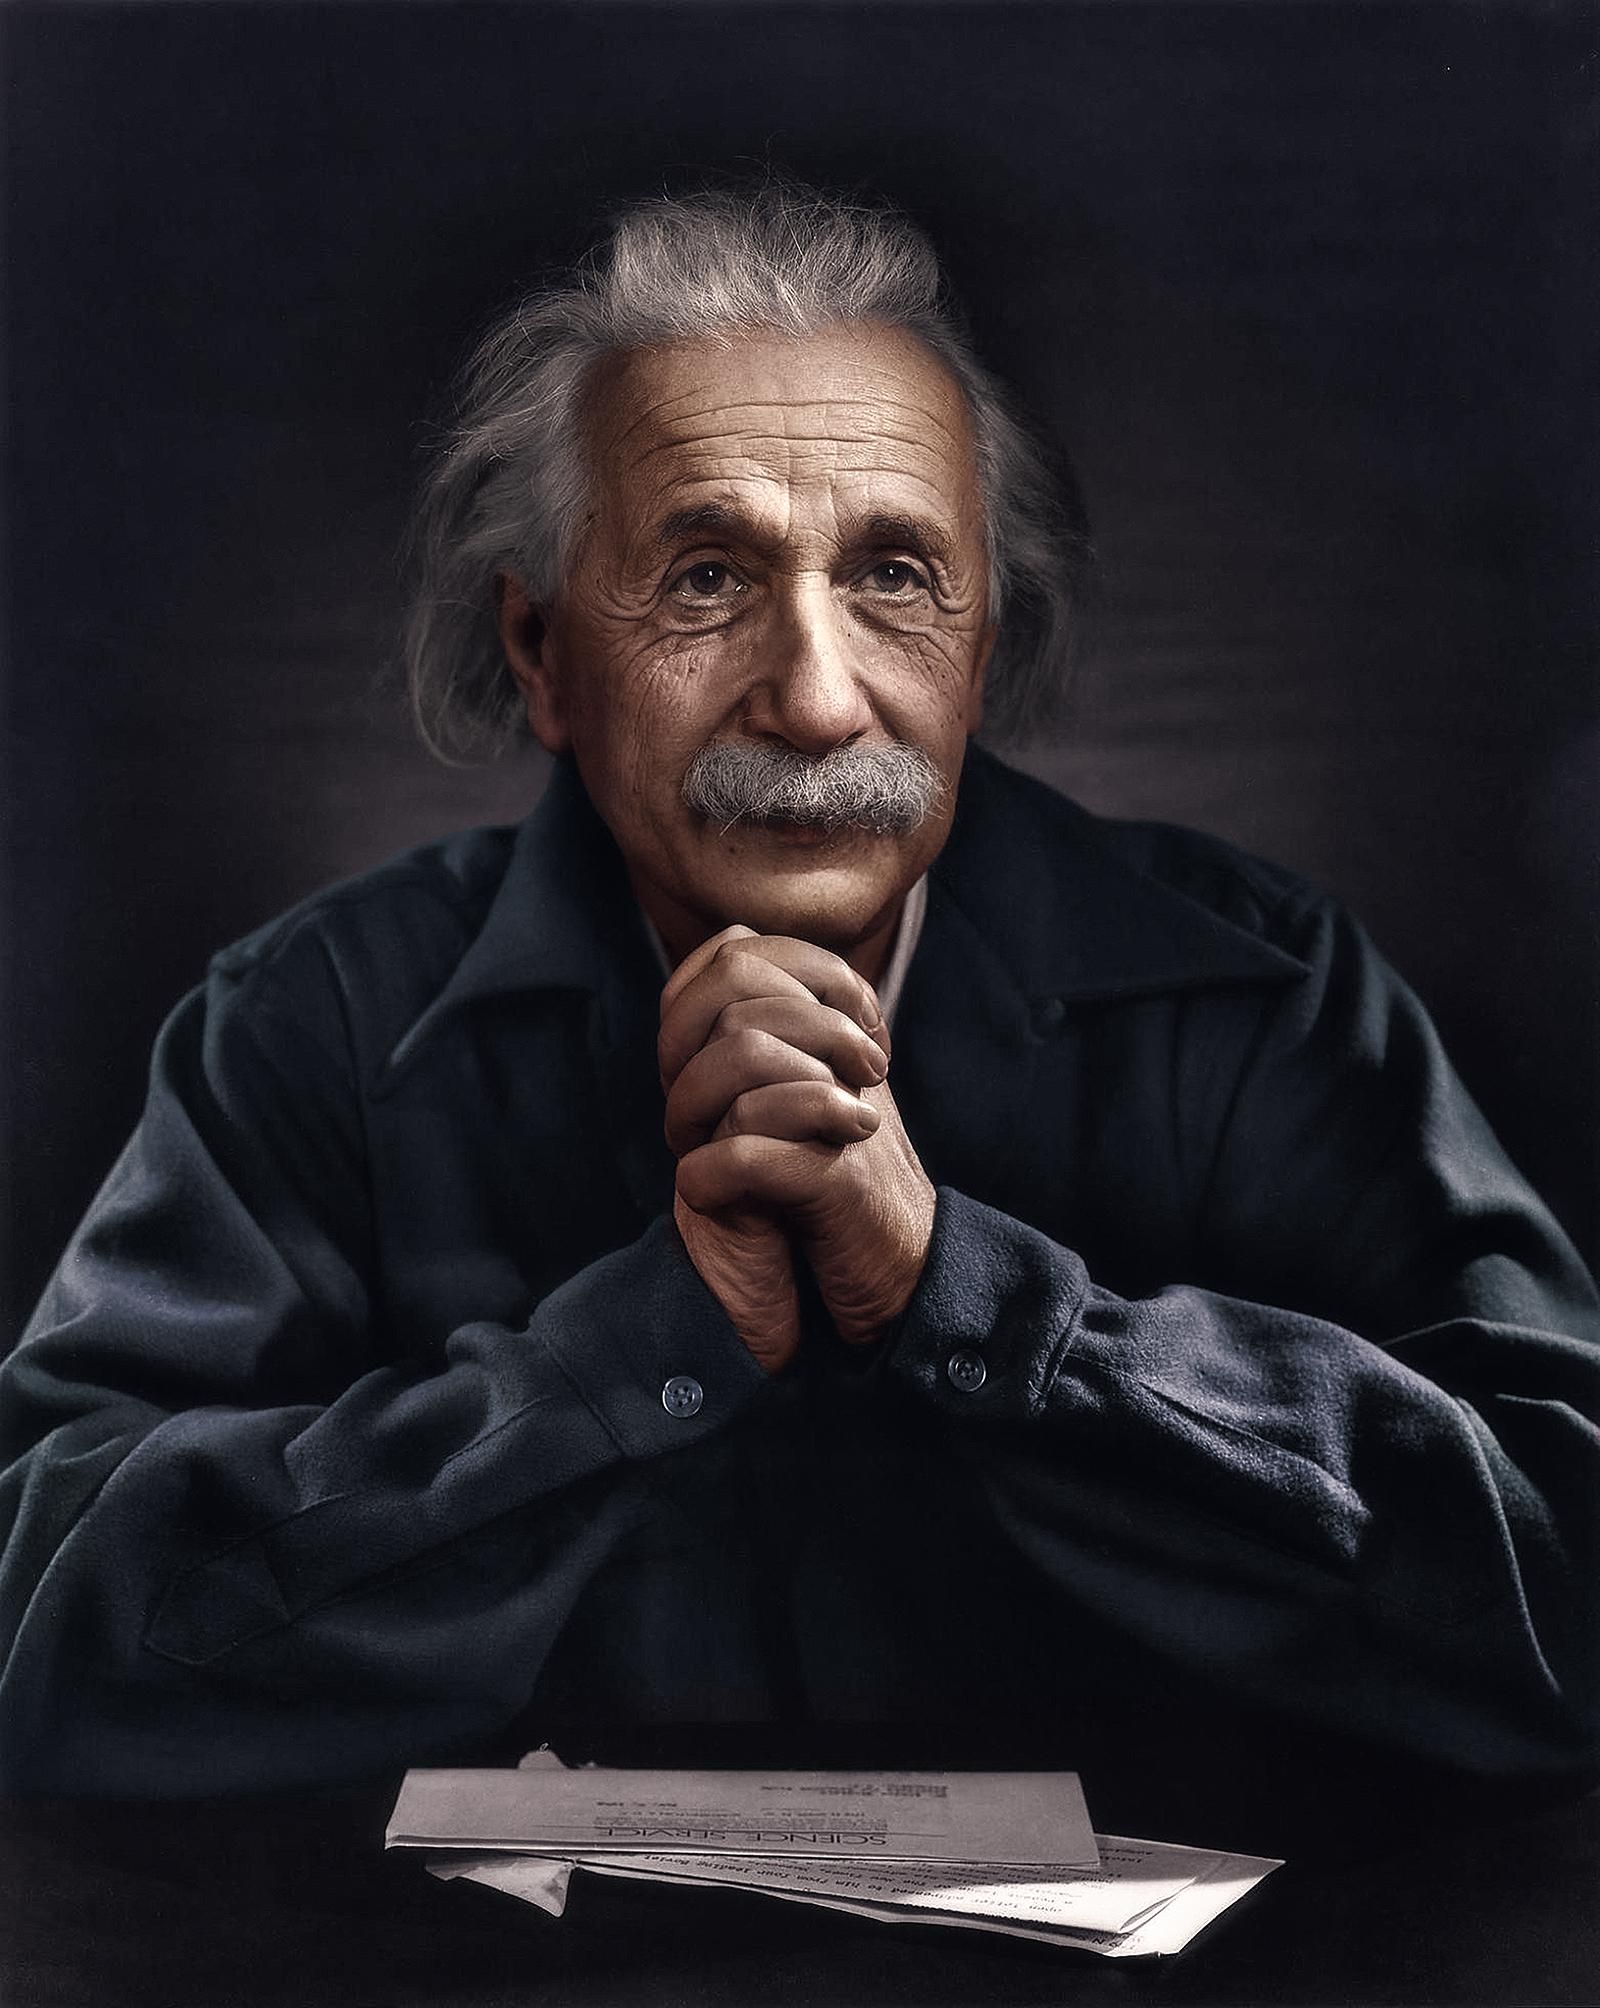 Alber Einstein sitting with his hands clasped together with papers in front of him